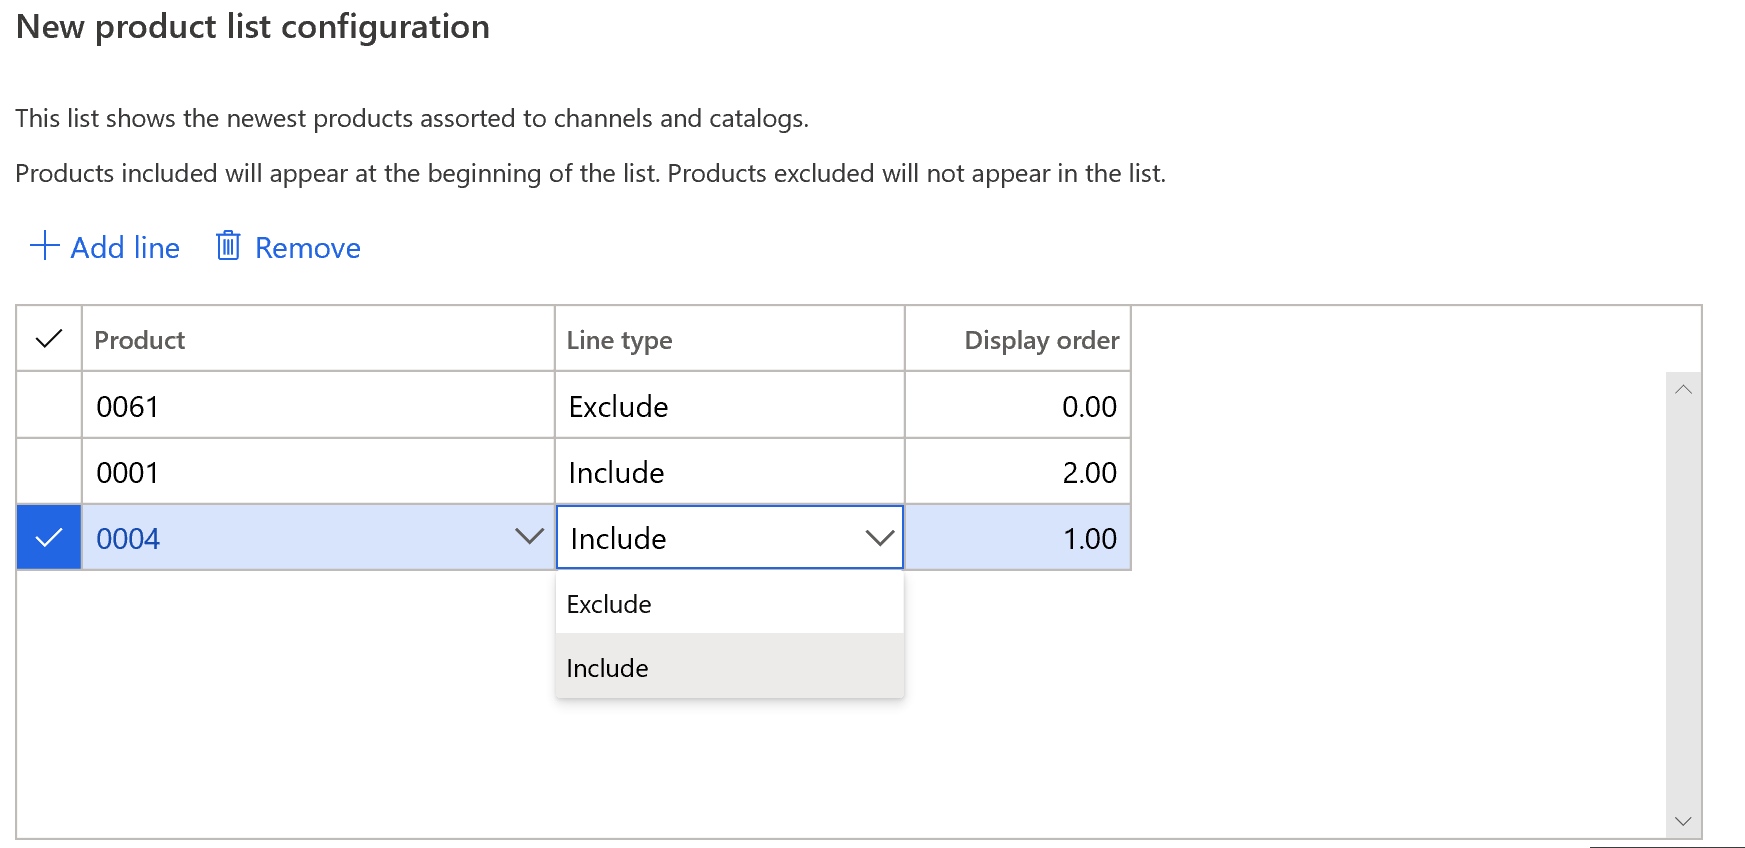 Example of Including or Excluding a product from the New product list.